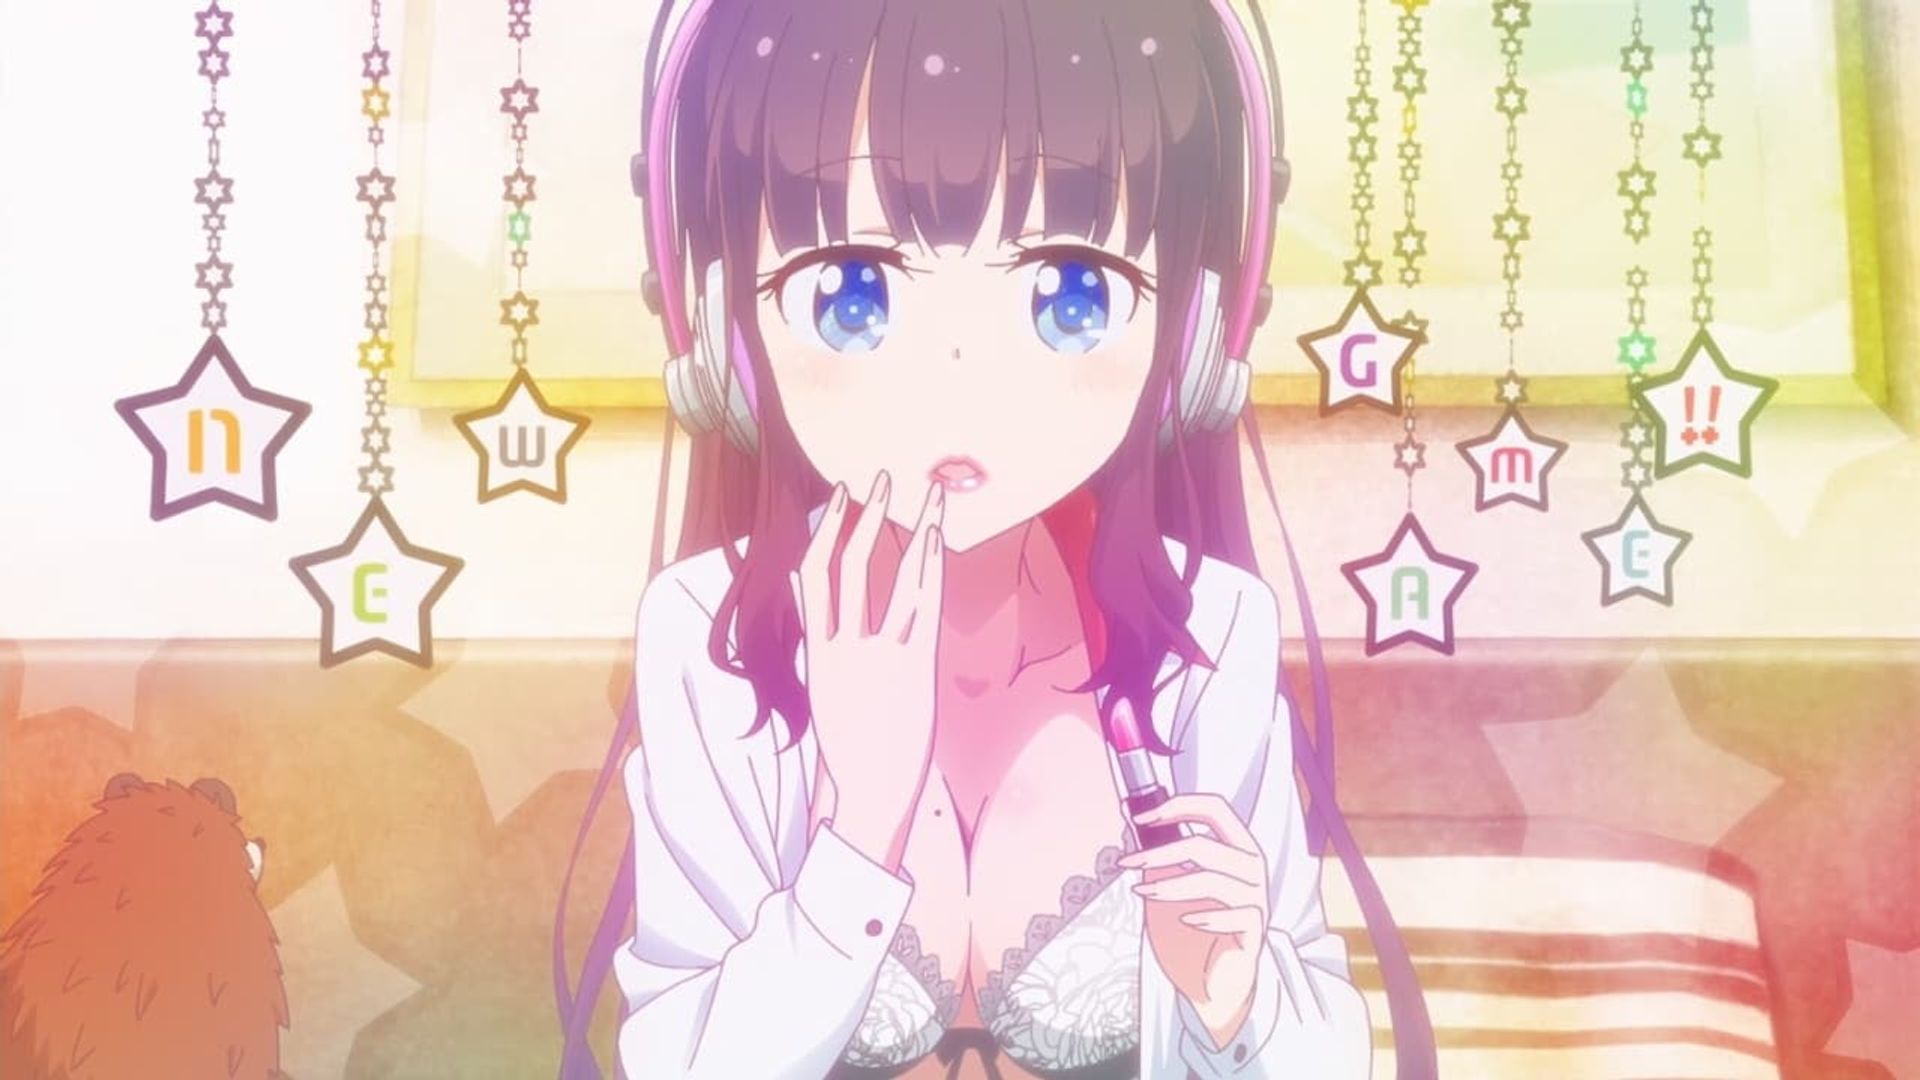 New Game! background